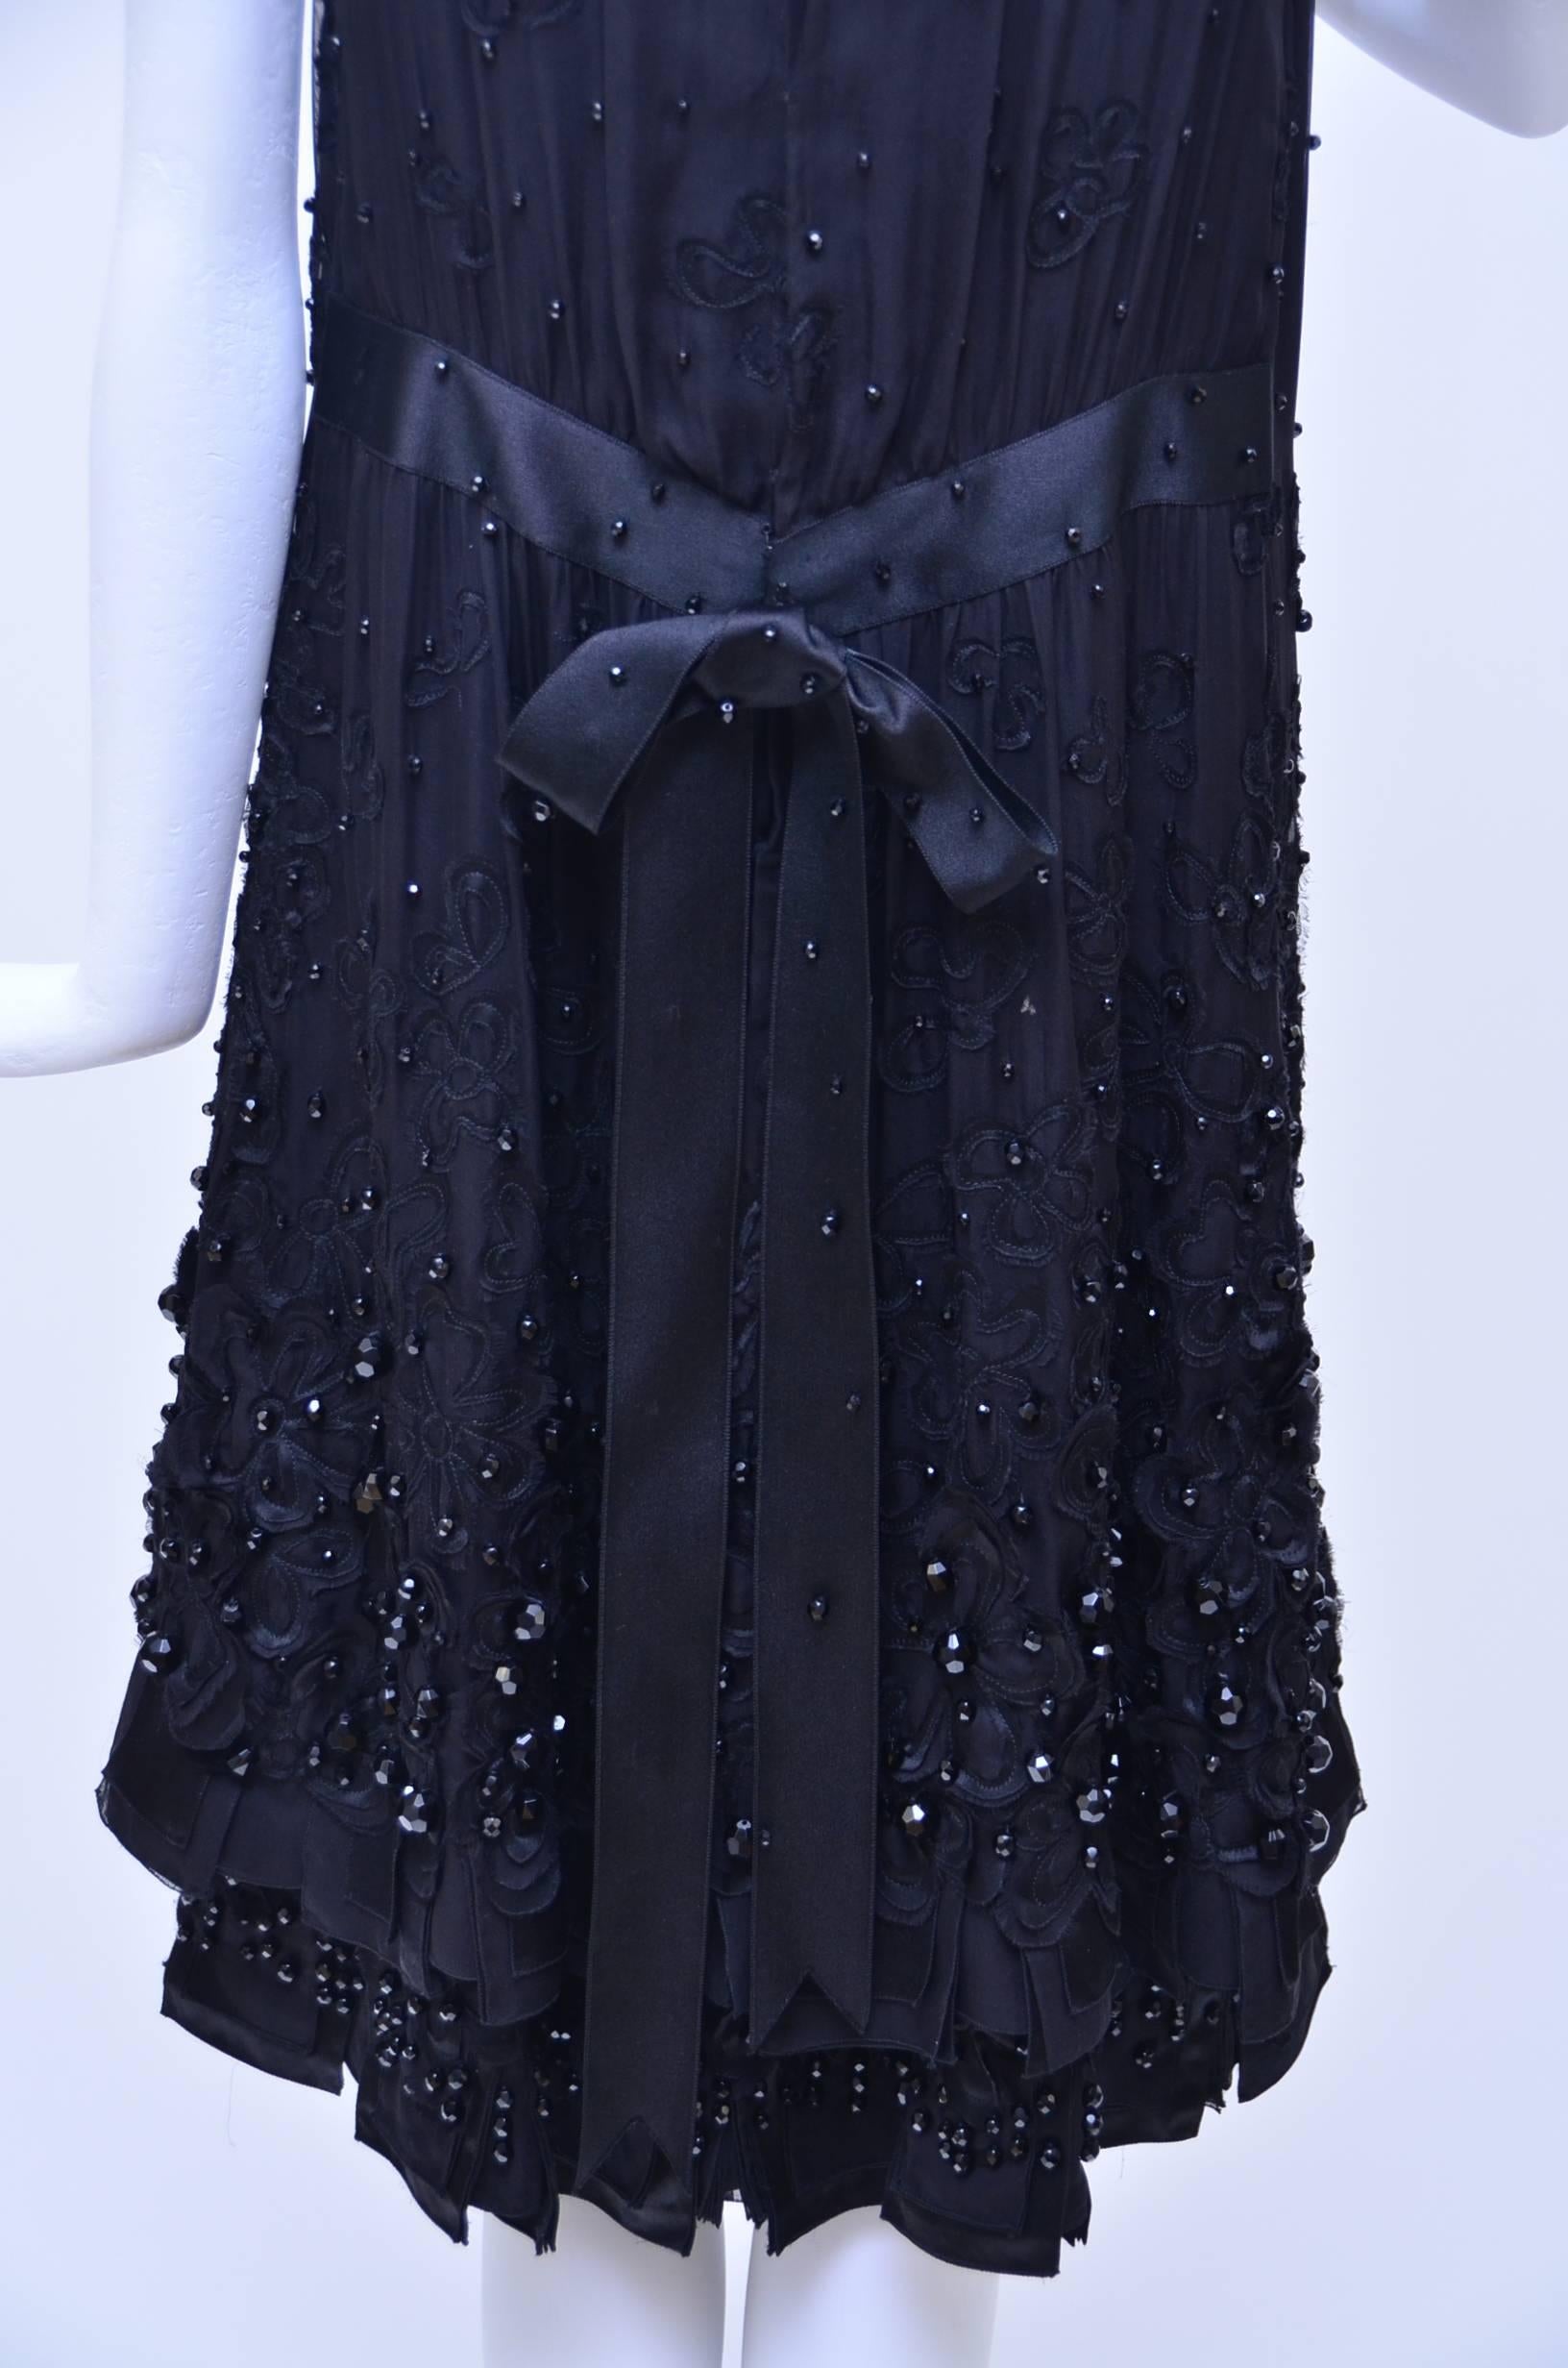 Women's or Men's CHANEL Haute Couture Black Silk Embellished  Dress With Bow  Beautiful.....